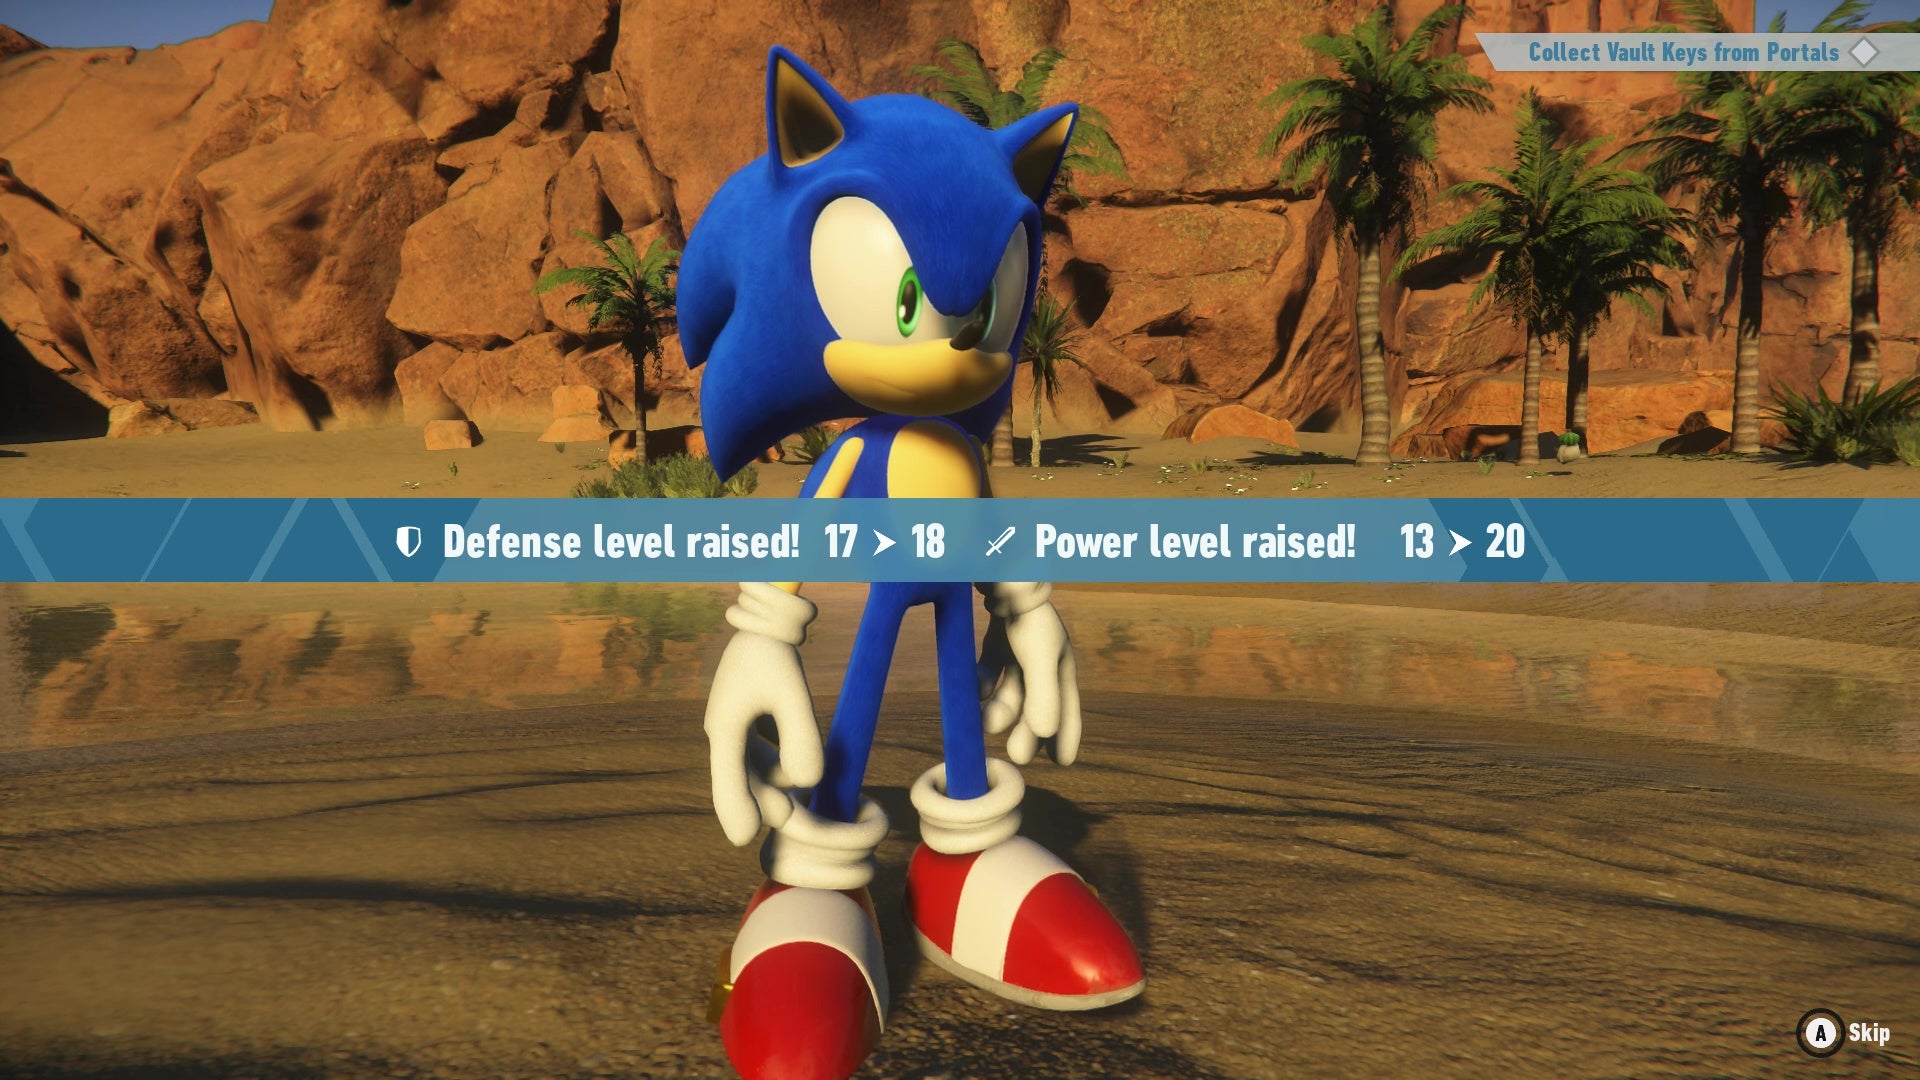 Sonic upgrades his defense and attack stats in Sonic Frontiers.